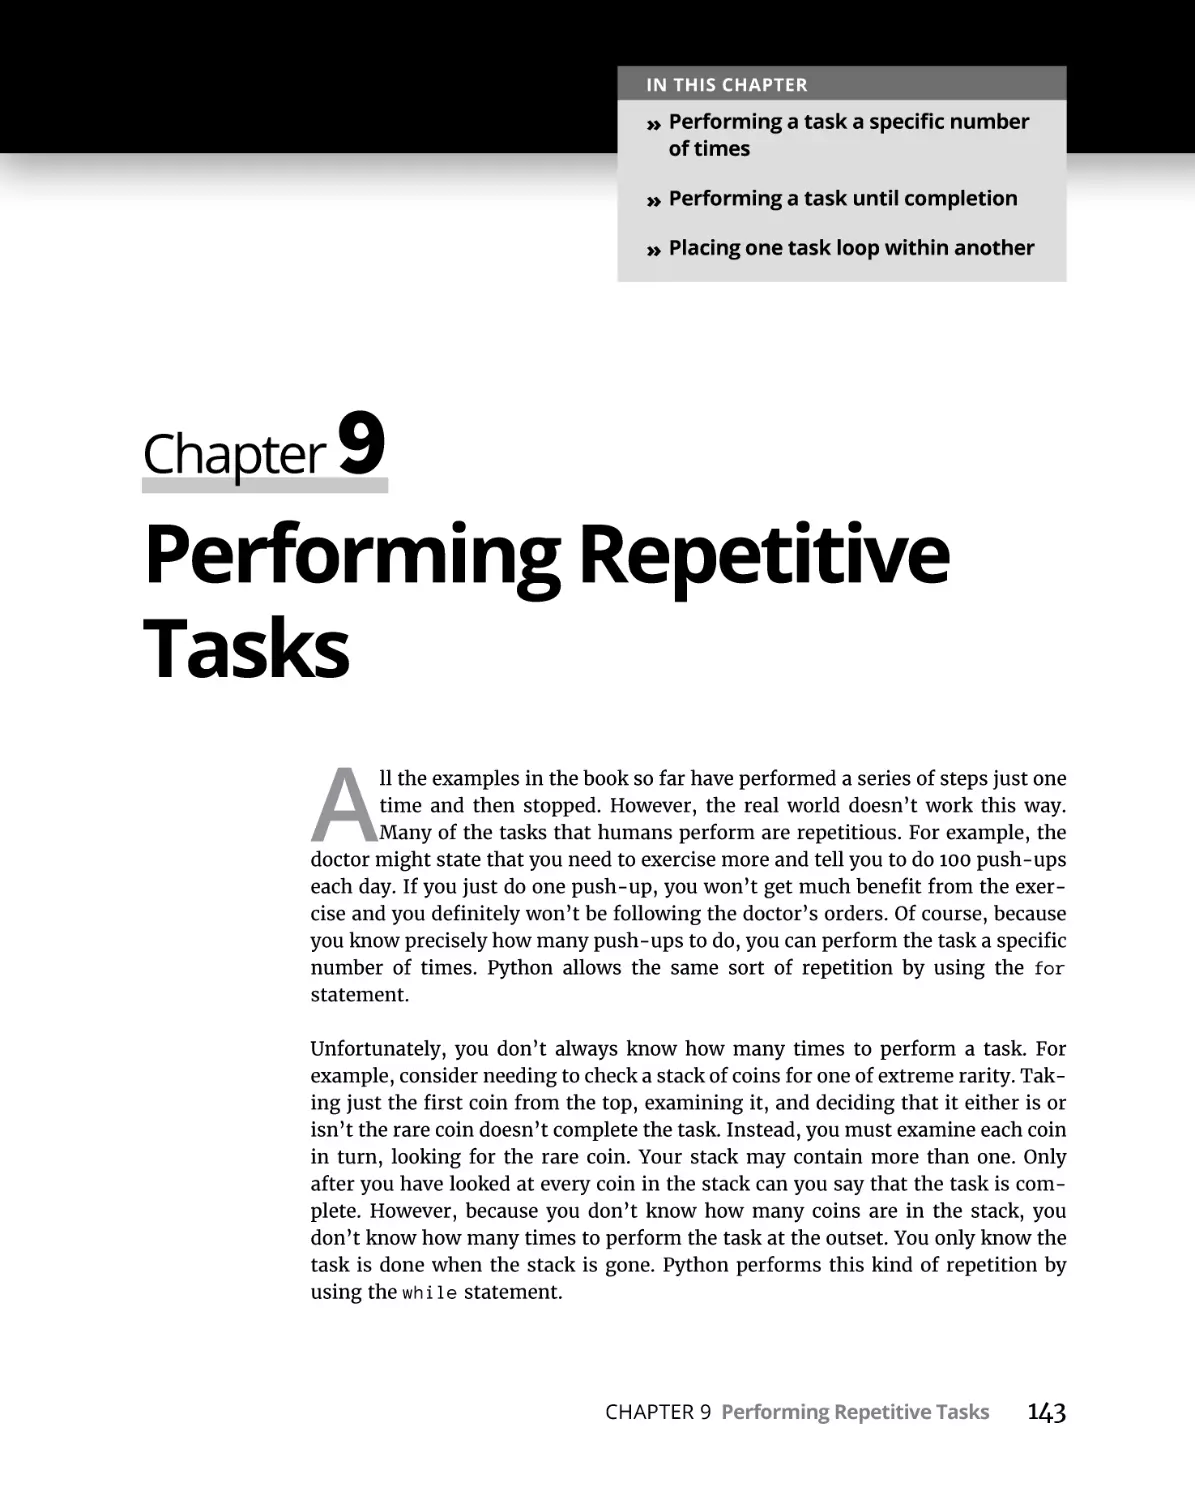 Chapter 9 Performing Repetitive Tasks